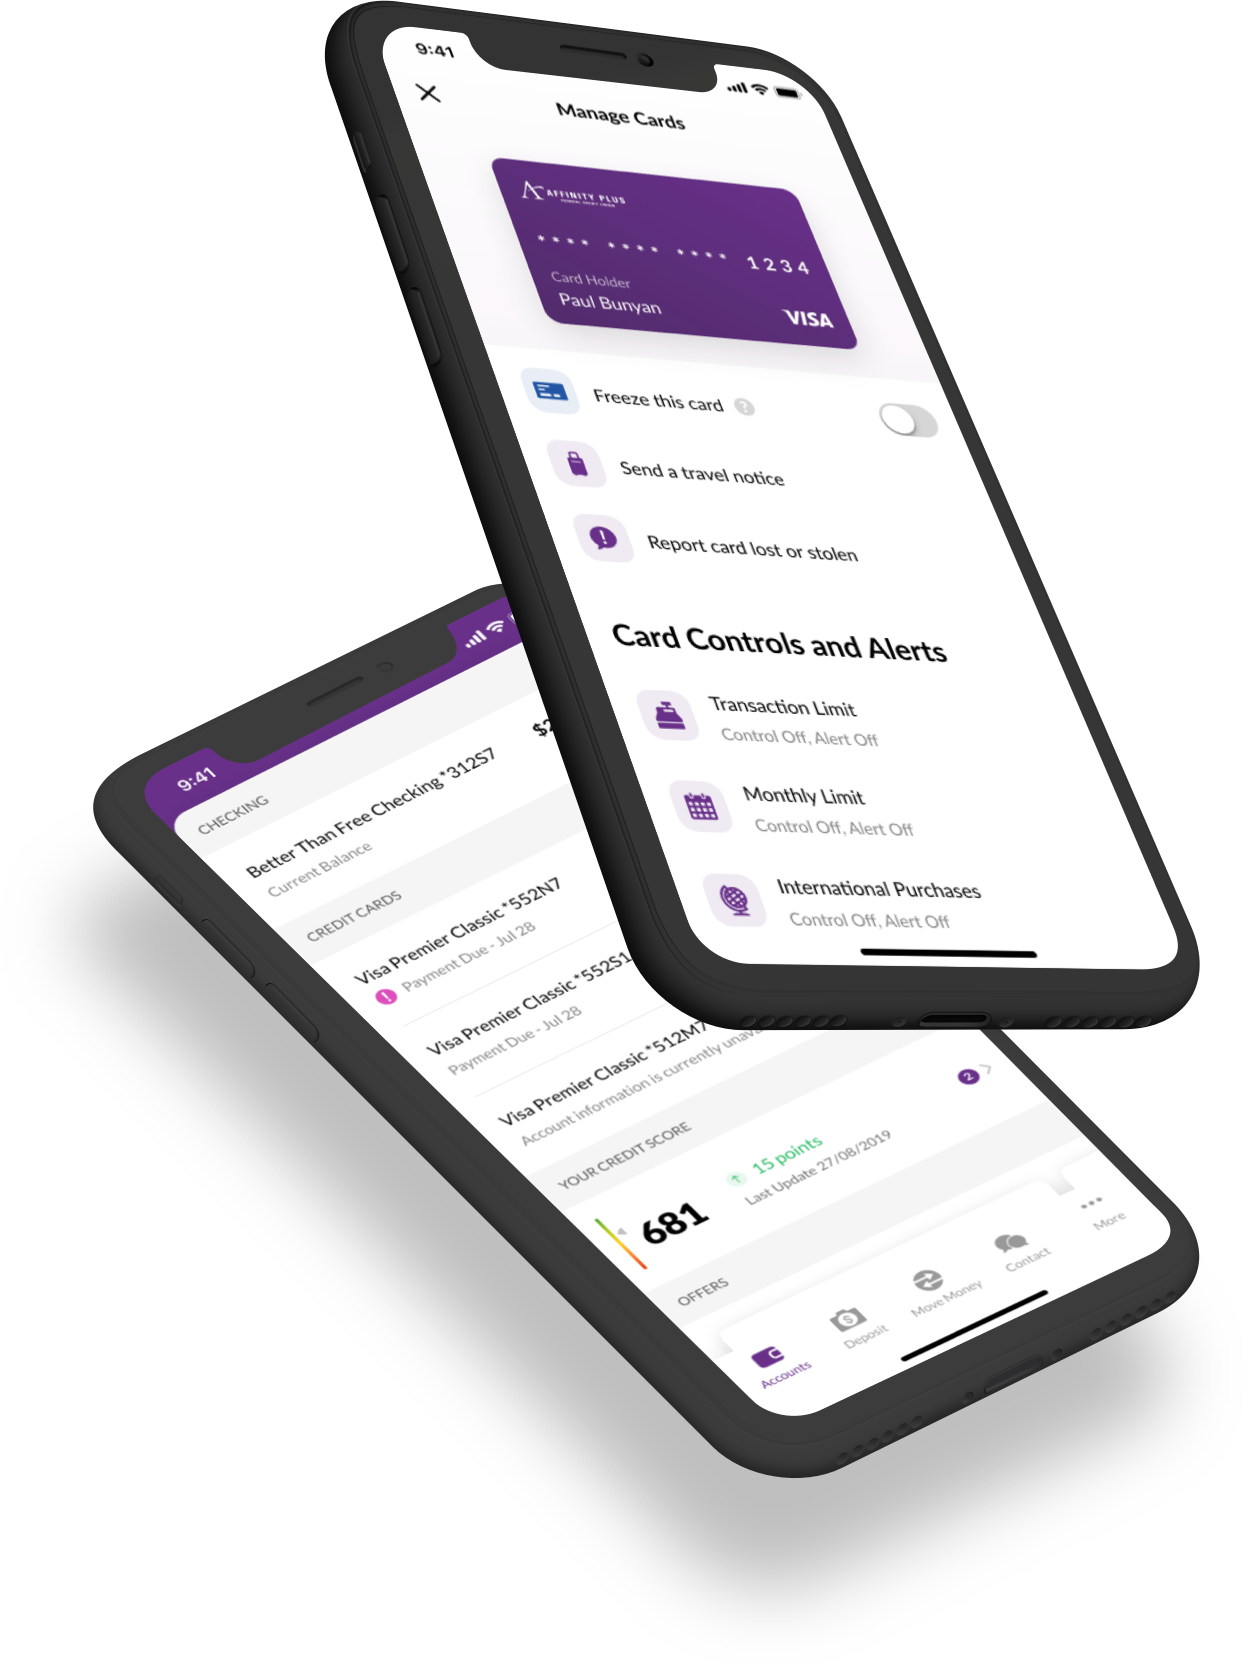 Affinity Plus Mobile App Security Features – Credit monitoring and card controls